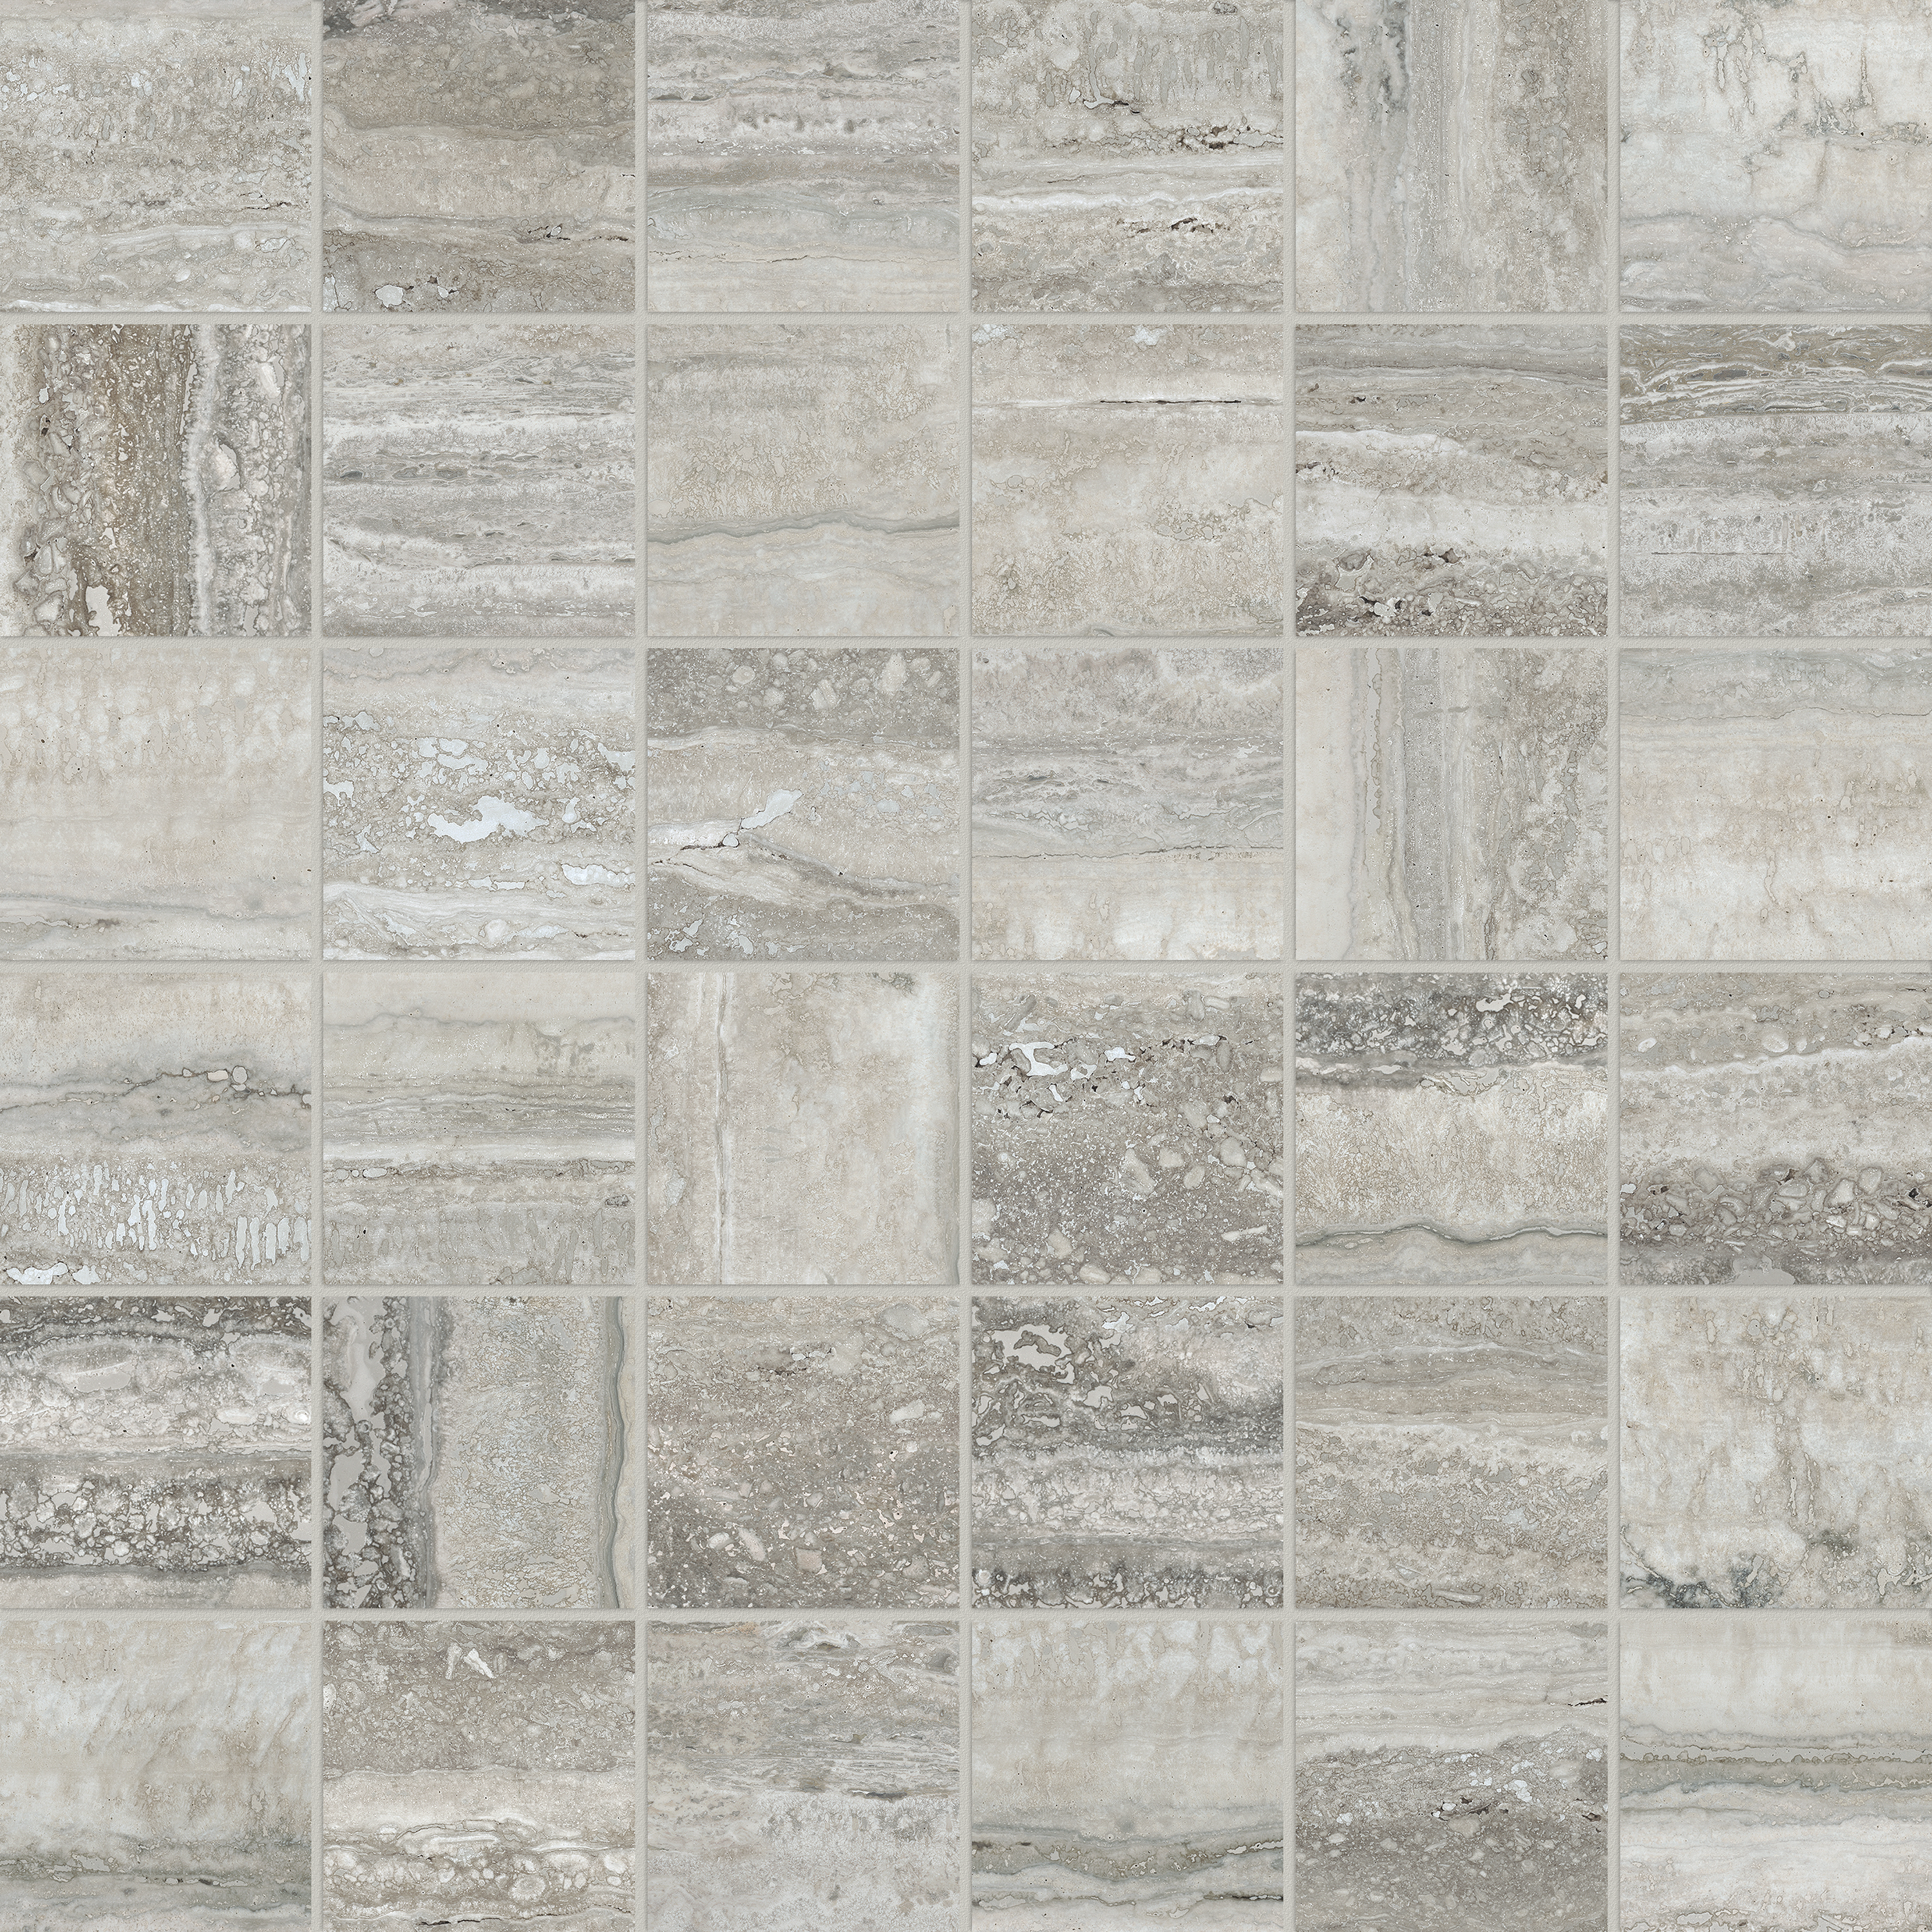 travertino instrata straight stack 2x2-inch pattern glazed porcelain mosaic from la marca anatolia collection distributed by surface group international honed finish straight edge edge mesh shape